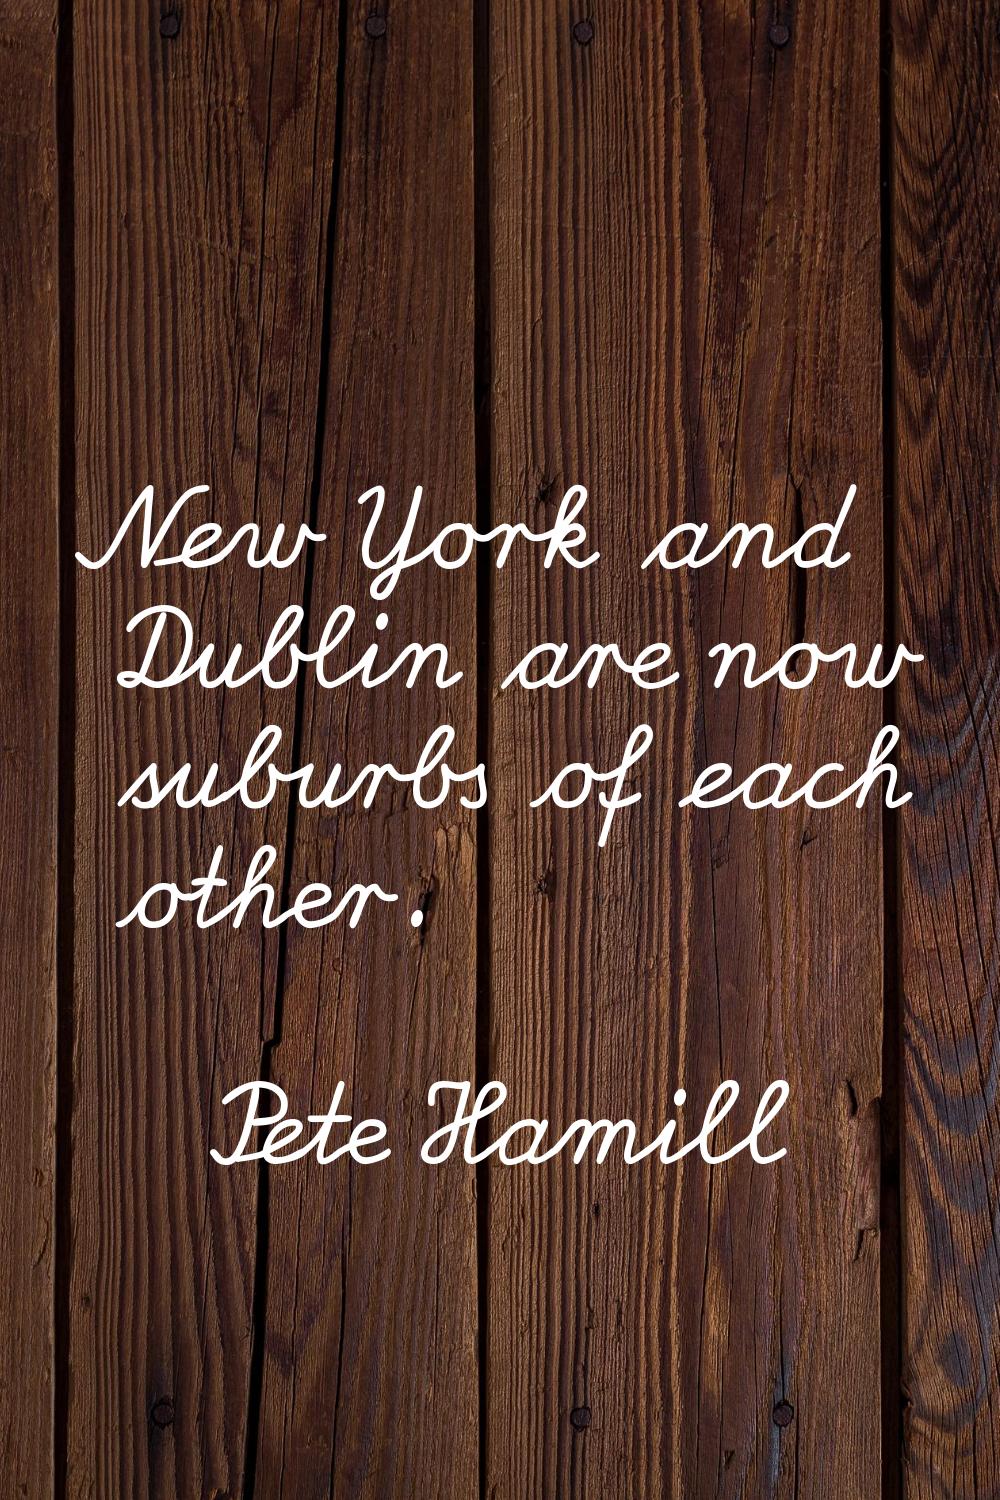 New York and Dublin are now suburbs of each other.